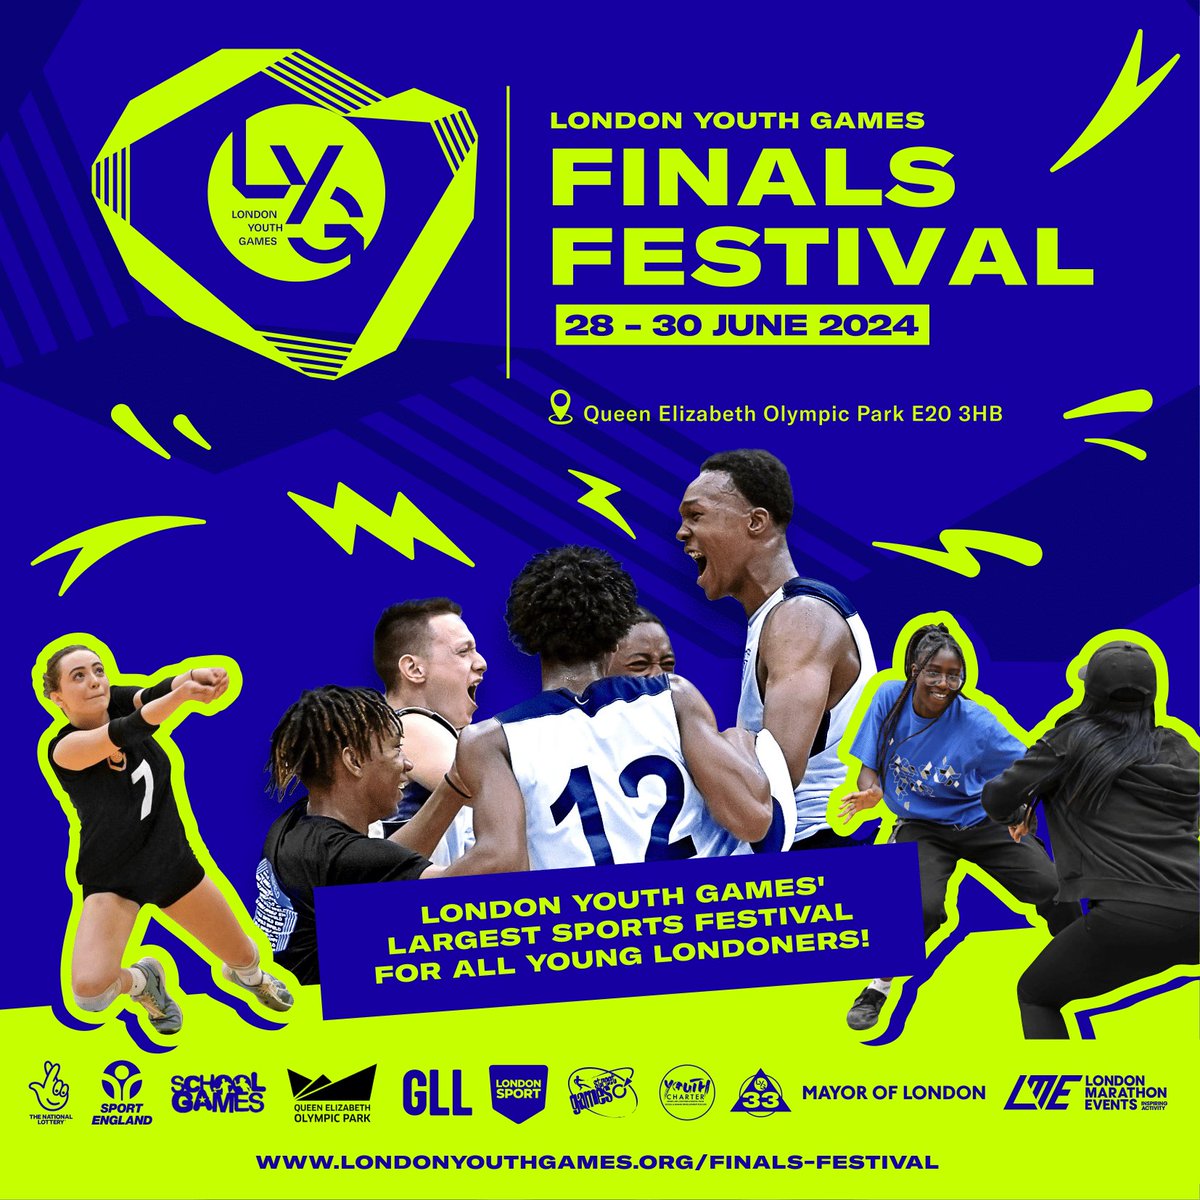 Join the London Youth Games’ Finals Festival for the ultimate sports festival experience - June 28-30, 2024 🔹Support Your Borough 🔹Try New Activities 🔹Meet and Greet Athletes 🔹Experience Iconic Venues Register your interest orlo.uk/JpxfK #LYGFinalsFestival